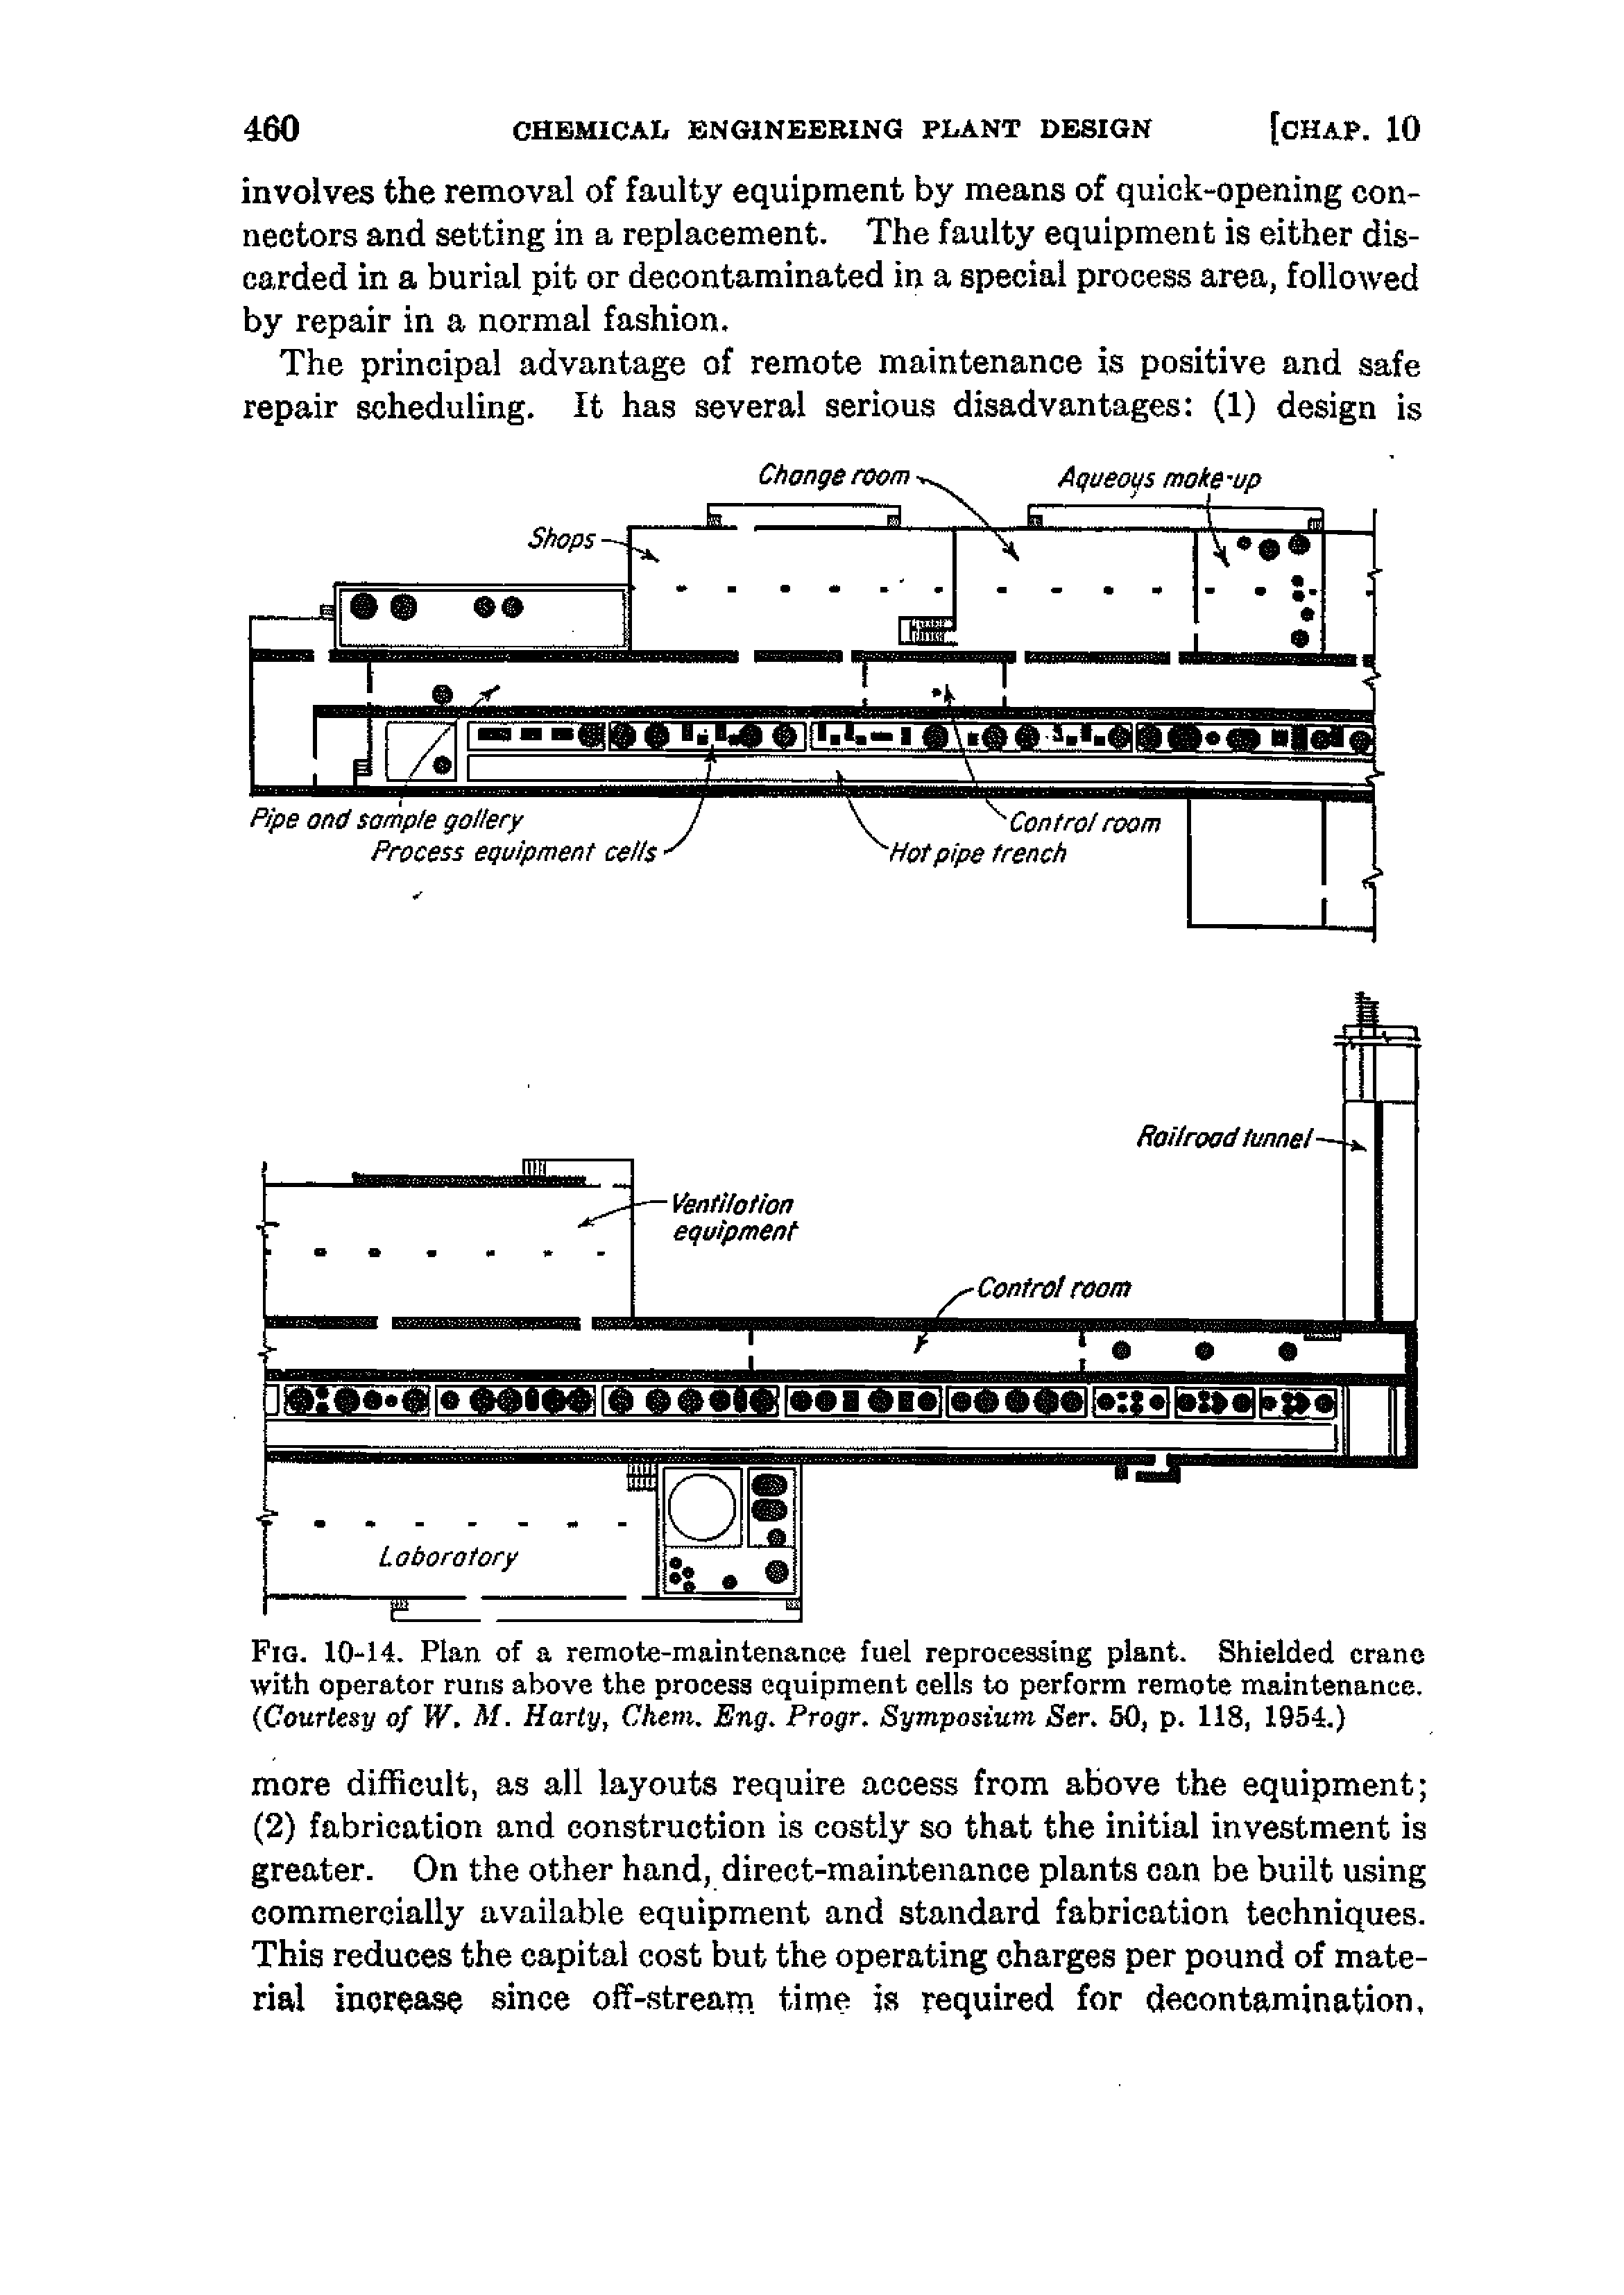 Fig. 10-14. Plan of a remote-maintenance fuel reprocessing plant. Shielded crane with operator runs above the process equipment cells to perform remote maintenance, Courtesy of W. Harty, Chem. Eng. Progr. Symposium Ser. 50, p. 118, 1954.)...